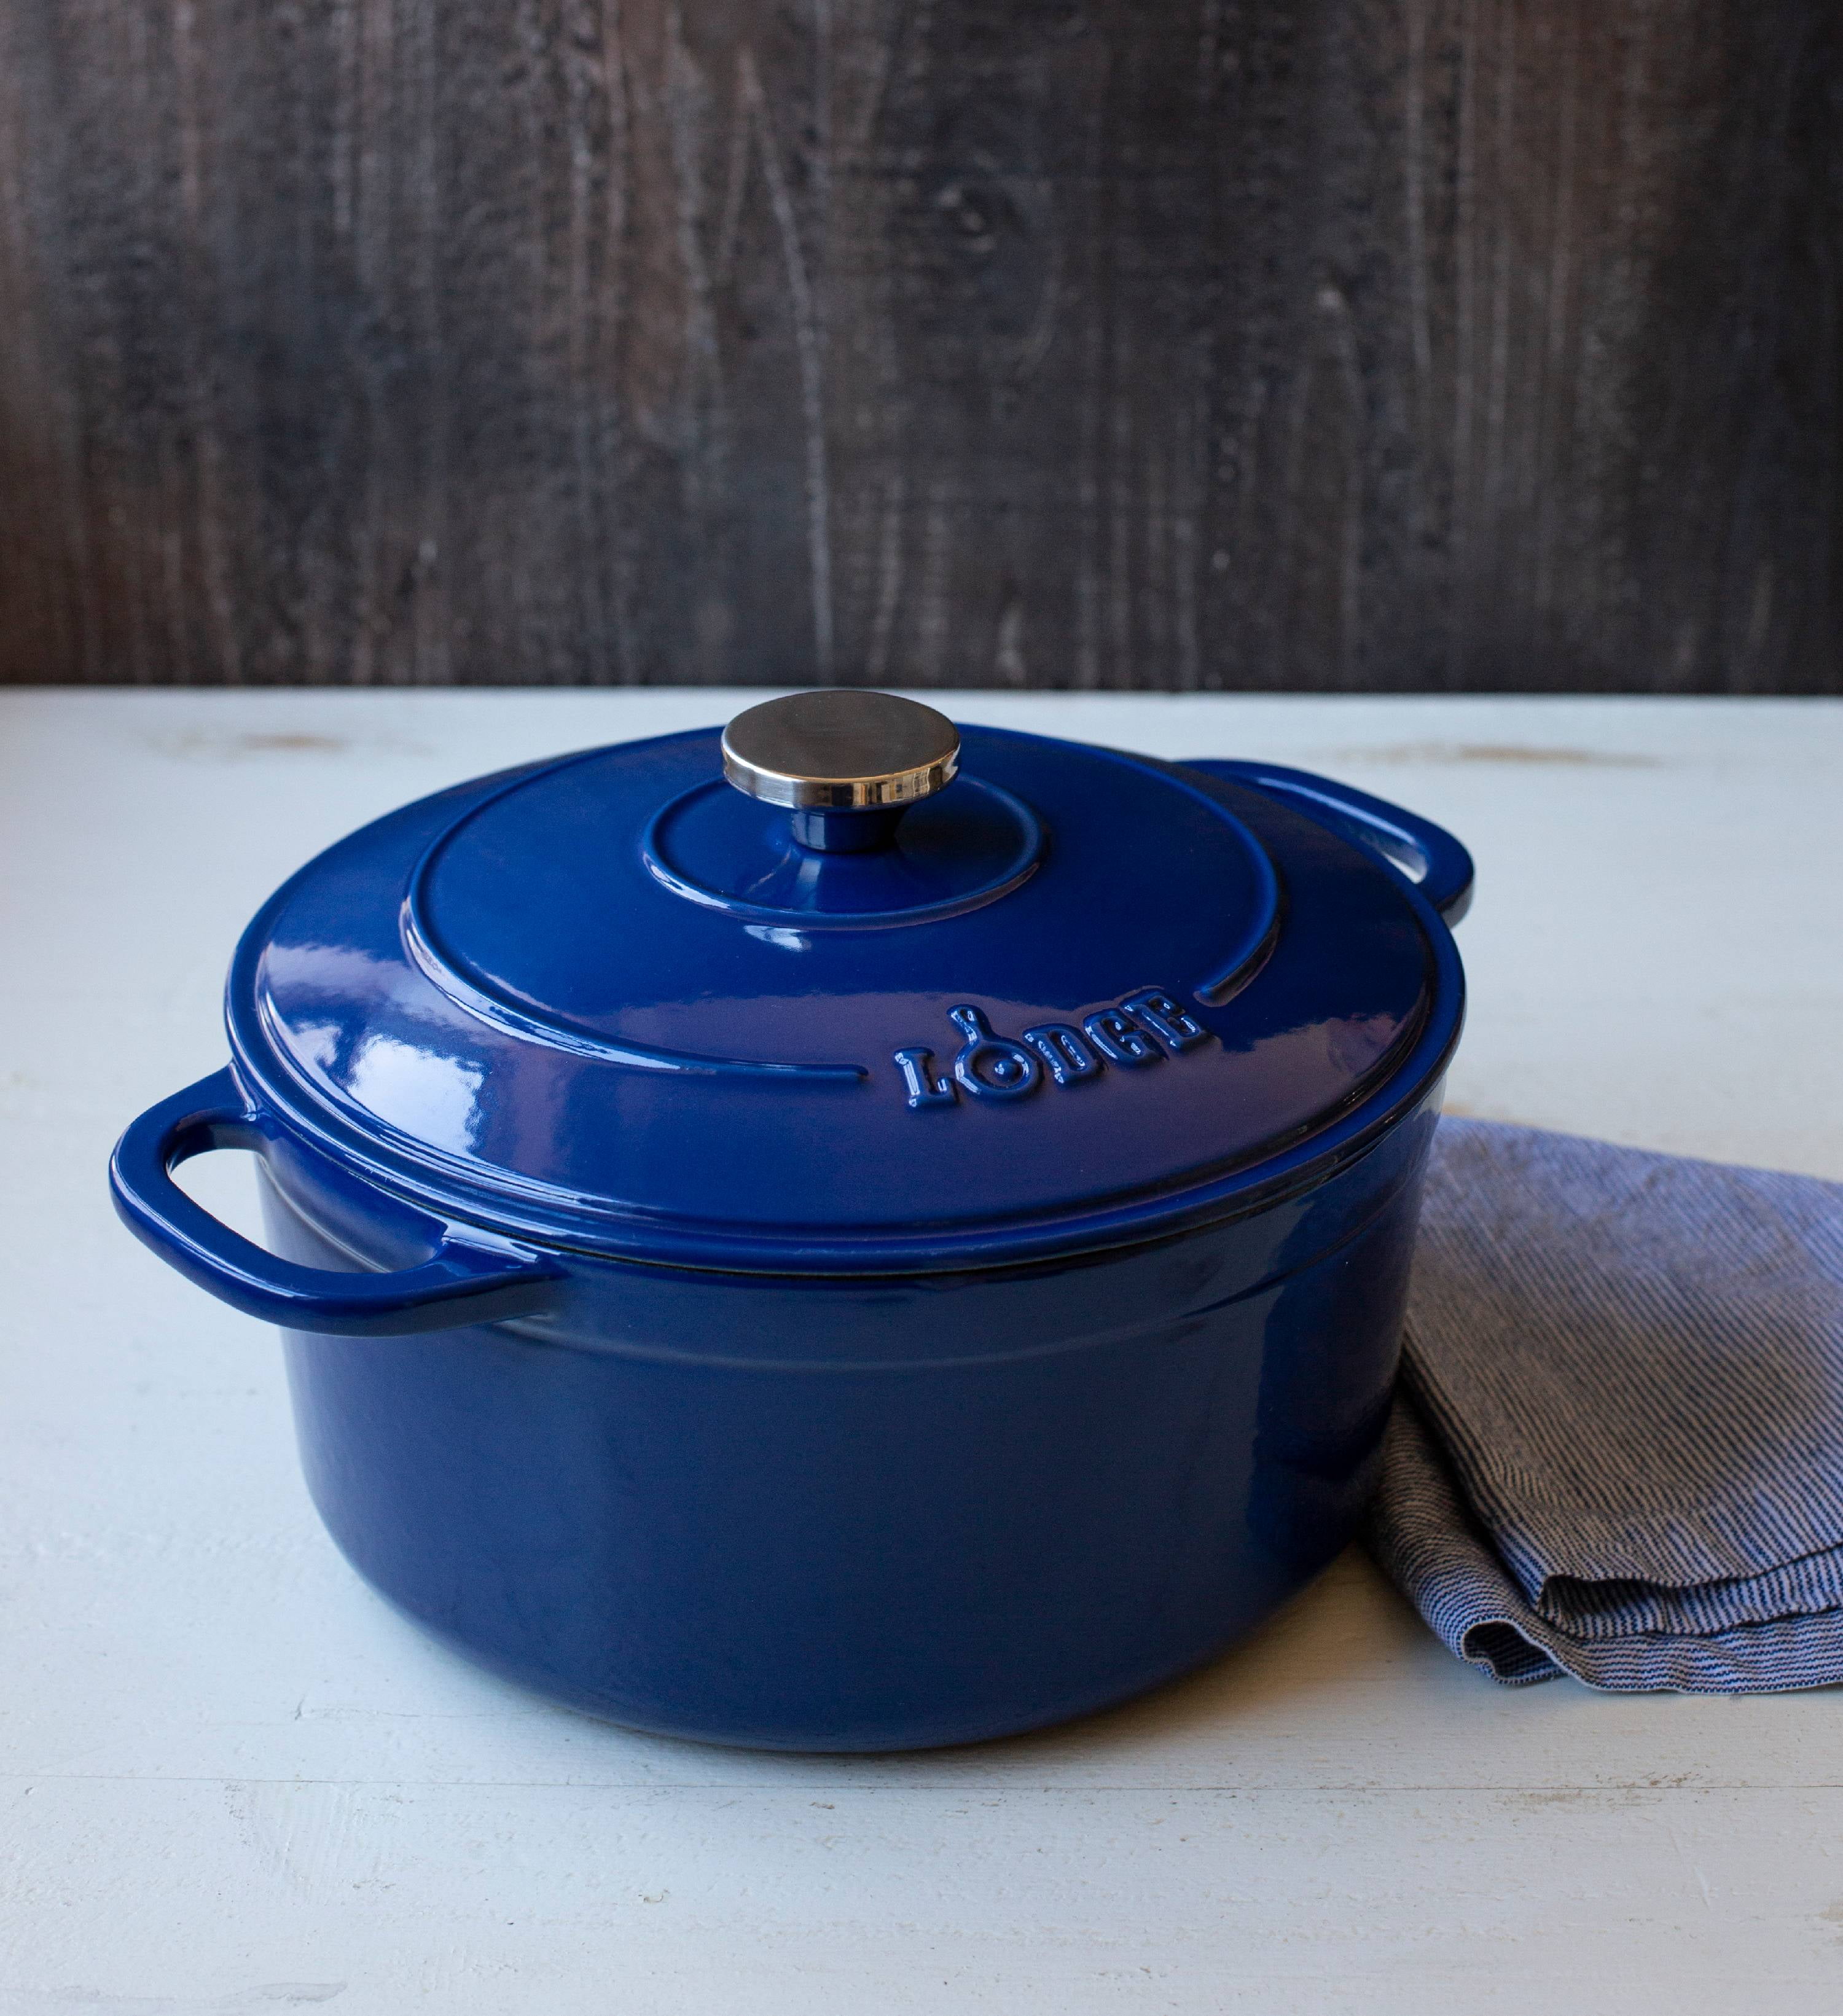 LODGE Brick Red Enameled Cast Iron 6 Qt Dutch Oven Cook Pot With Lid